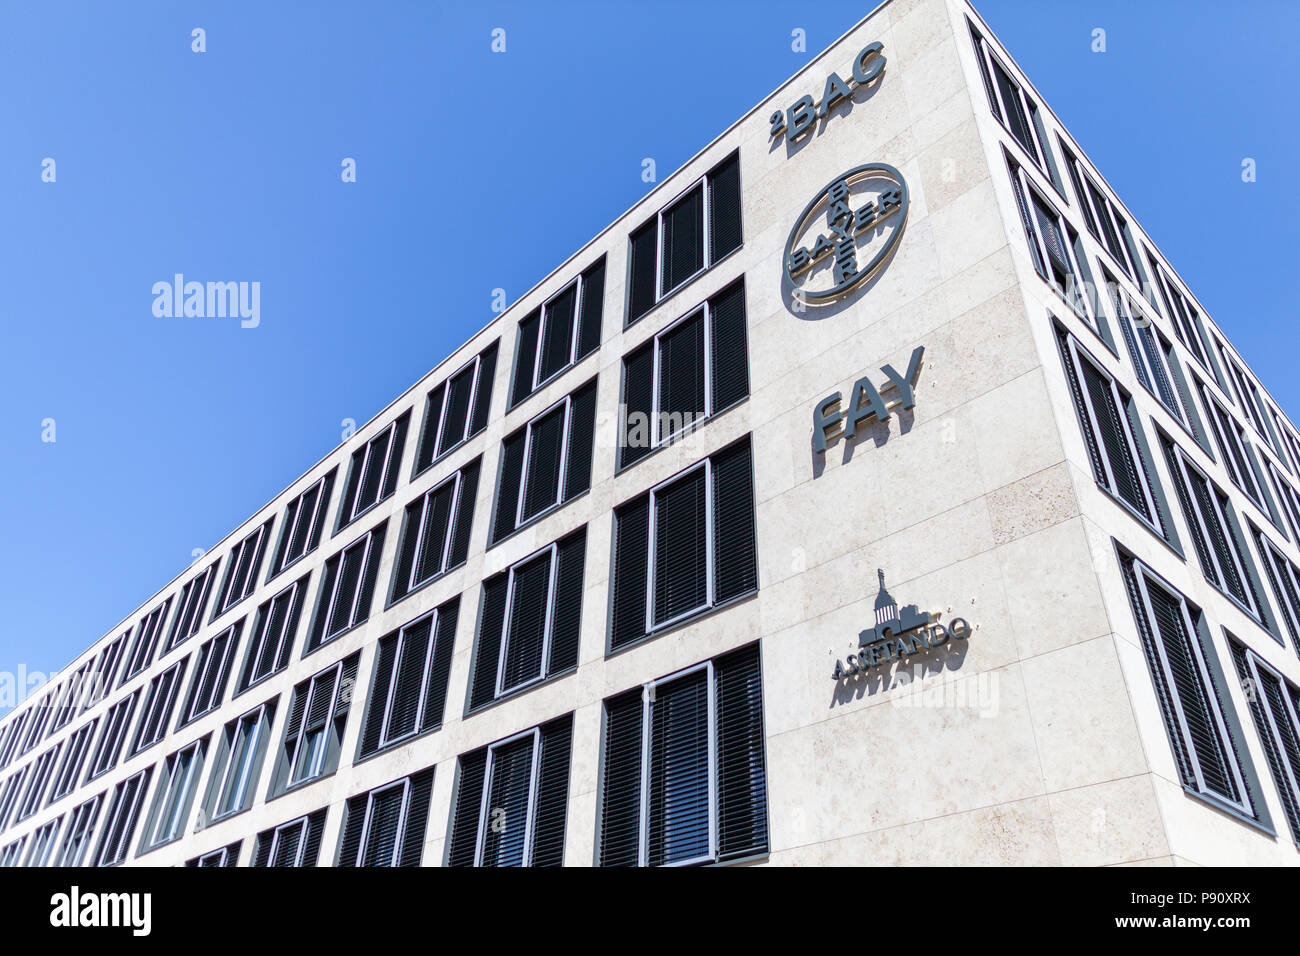 BERLIN / GERMANY - APRIL 29, 2018: Berlin- Brandenburg Airport Center on Willy-Brandt-Platz. The BAC is the first office and service building of Airpo Stock Photo